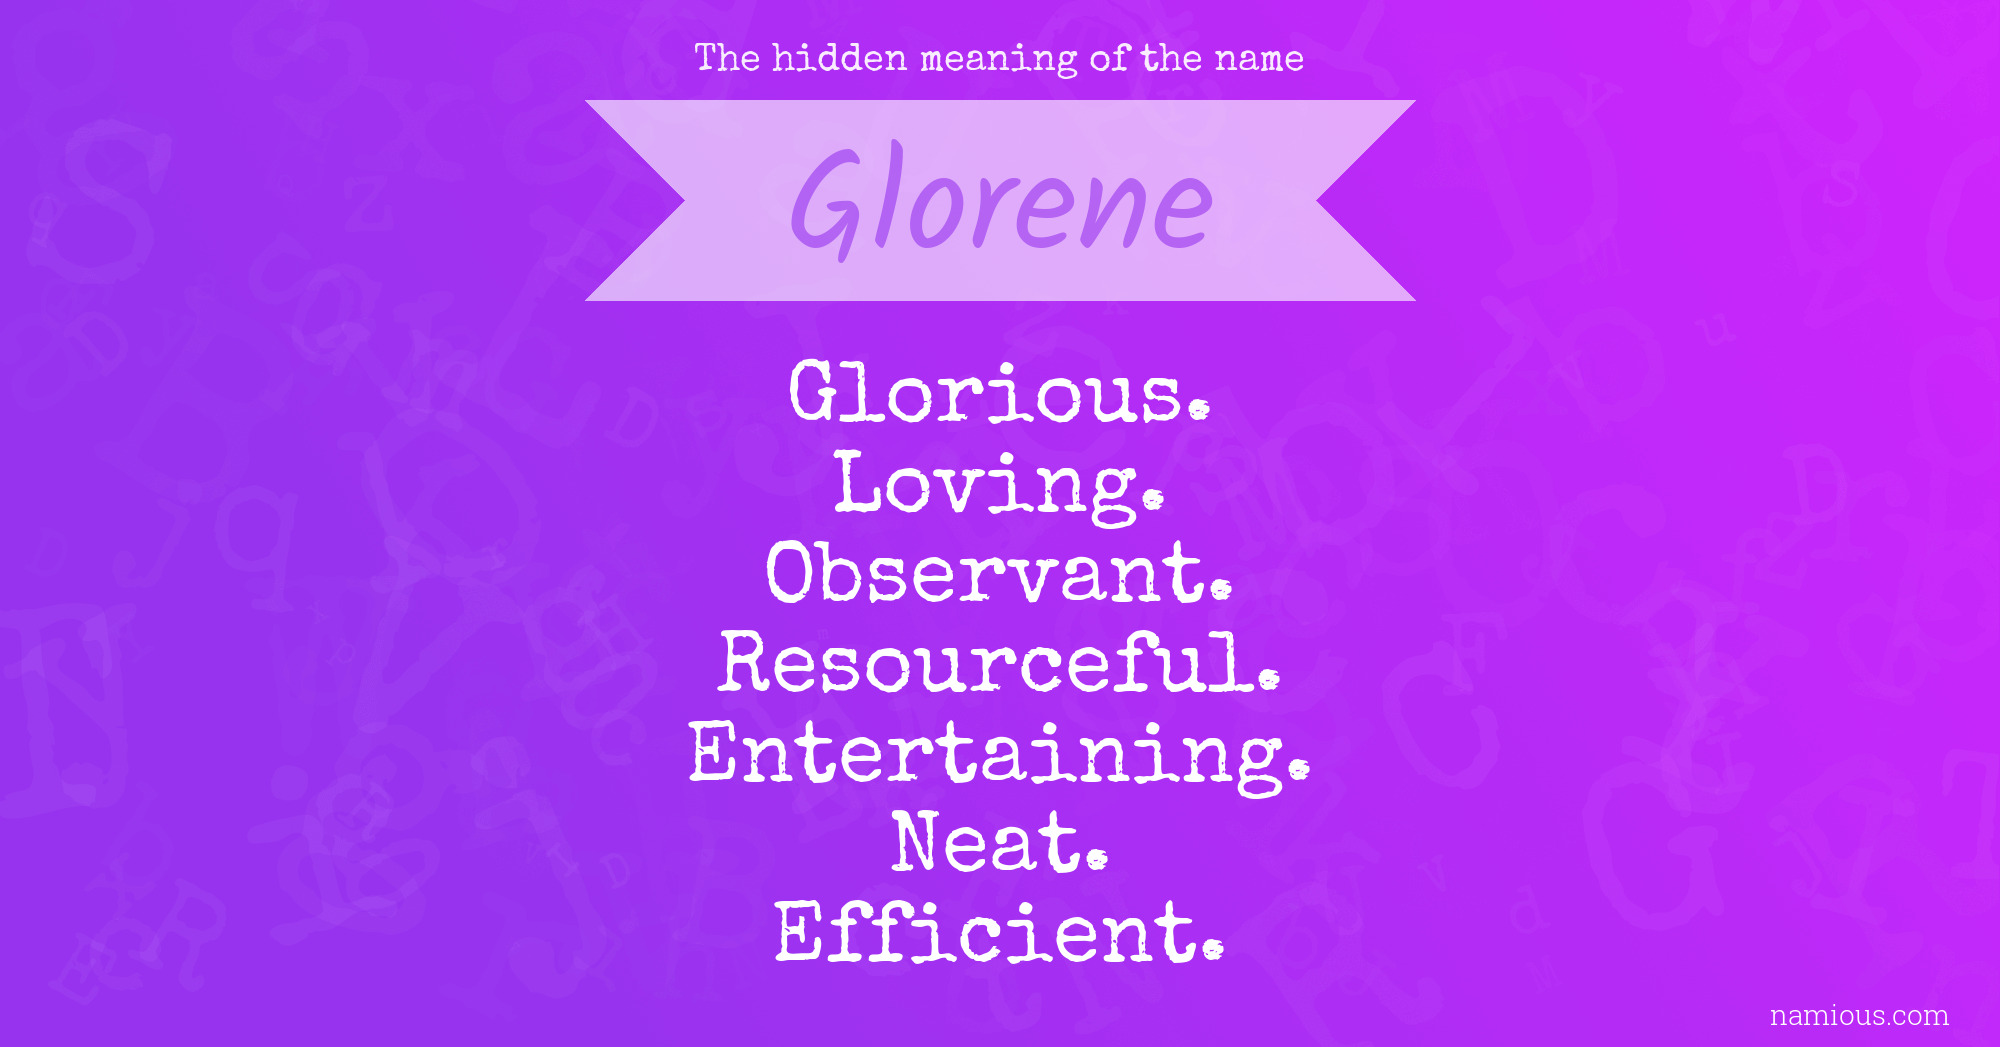 The hidden meaning of the name Glorene